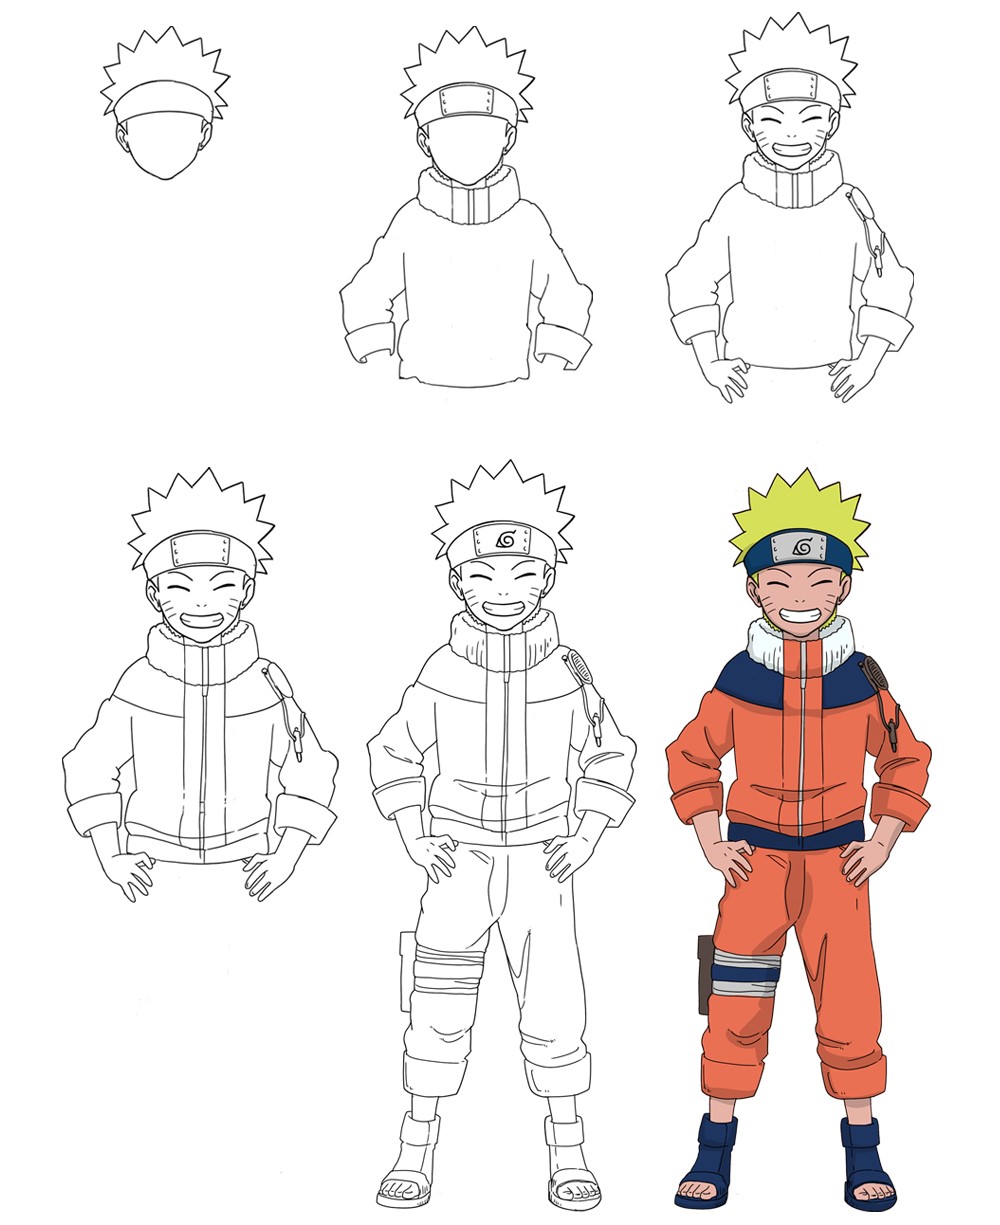 Naruto is happy Drawing Ideas